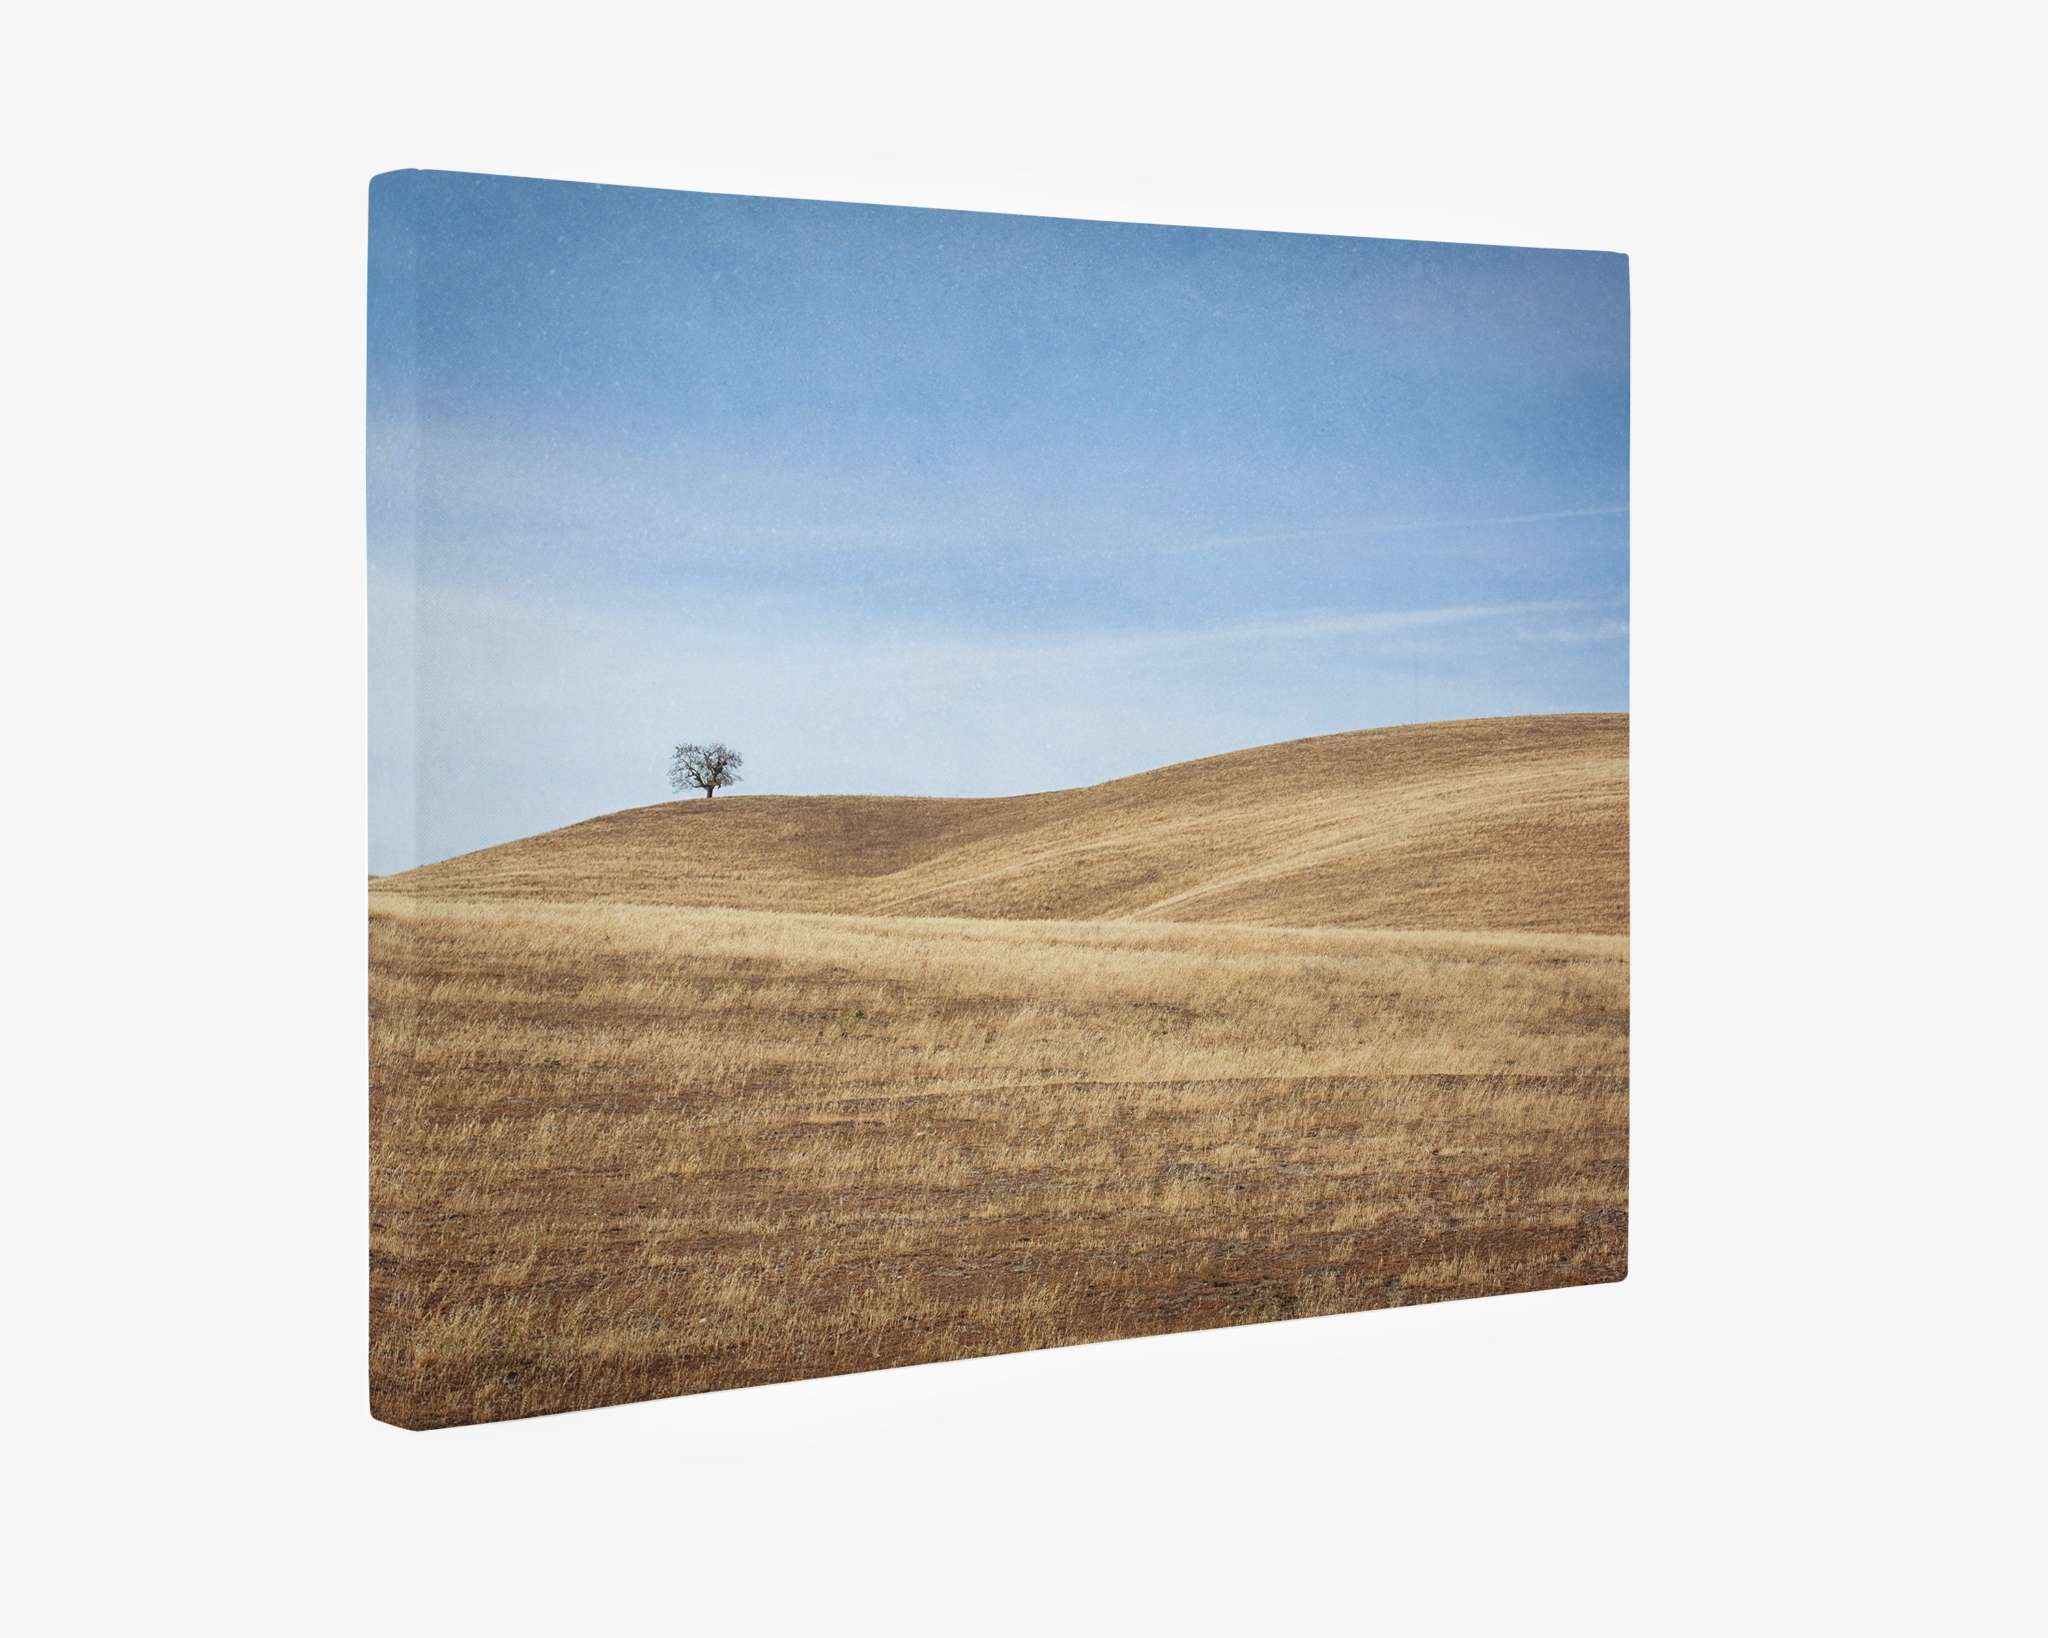 A premium artist-grade canvas print, the Offley Green California Central Coast Landscape Canvas Wall Decor 'Golden Ynez,' features a landscape with a solitary tree on a distant hill. The scene, composed of rolling brown hills under a clear blue sky, evokes solitude and tranquility. This ready-to-hang solution offers both beauty and convenience for any space.